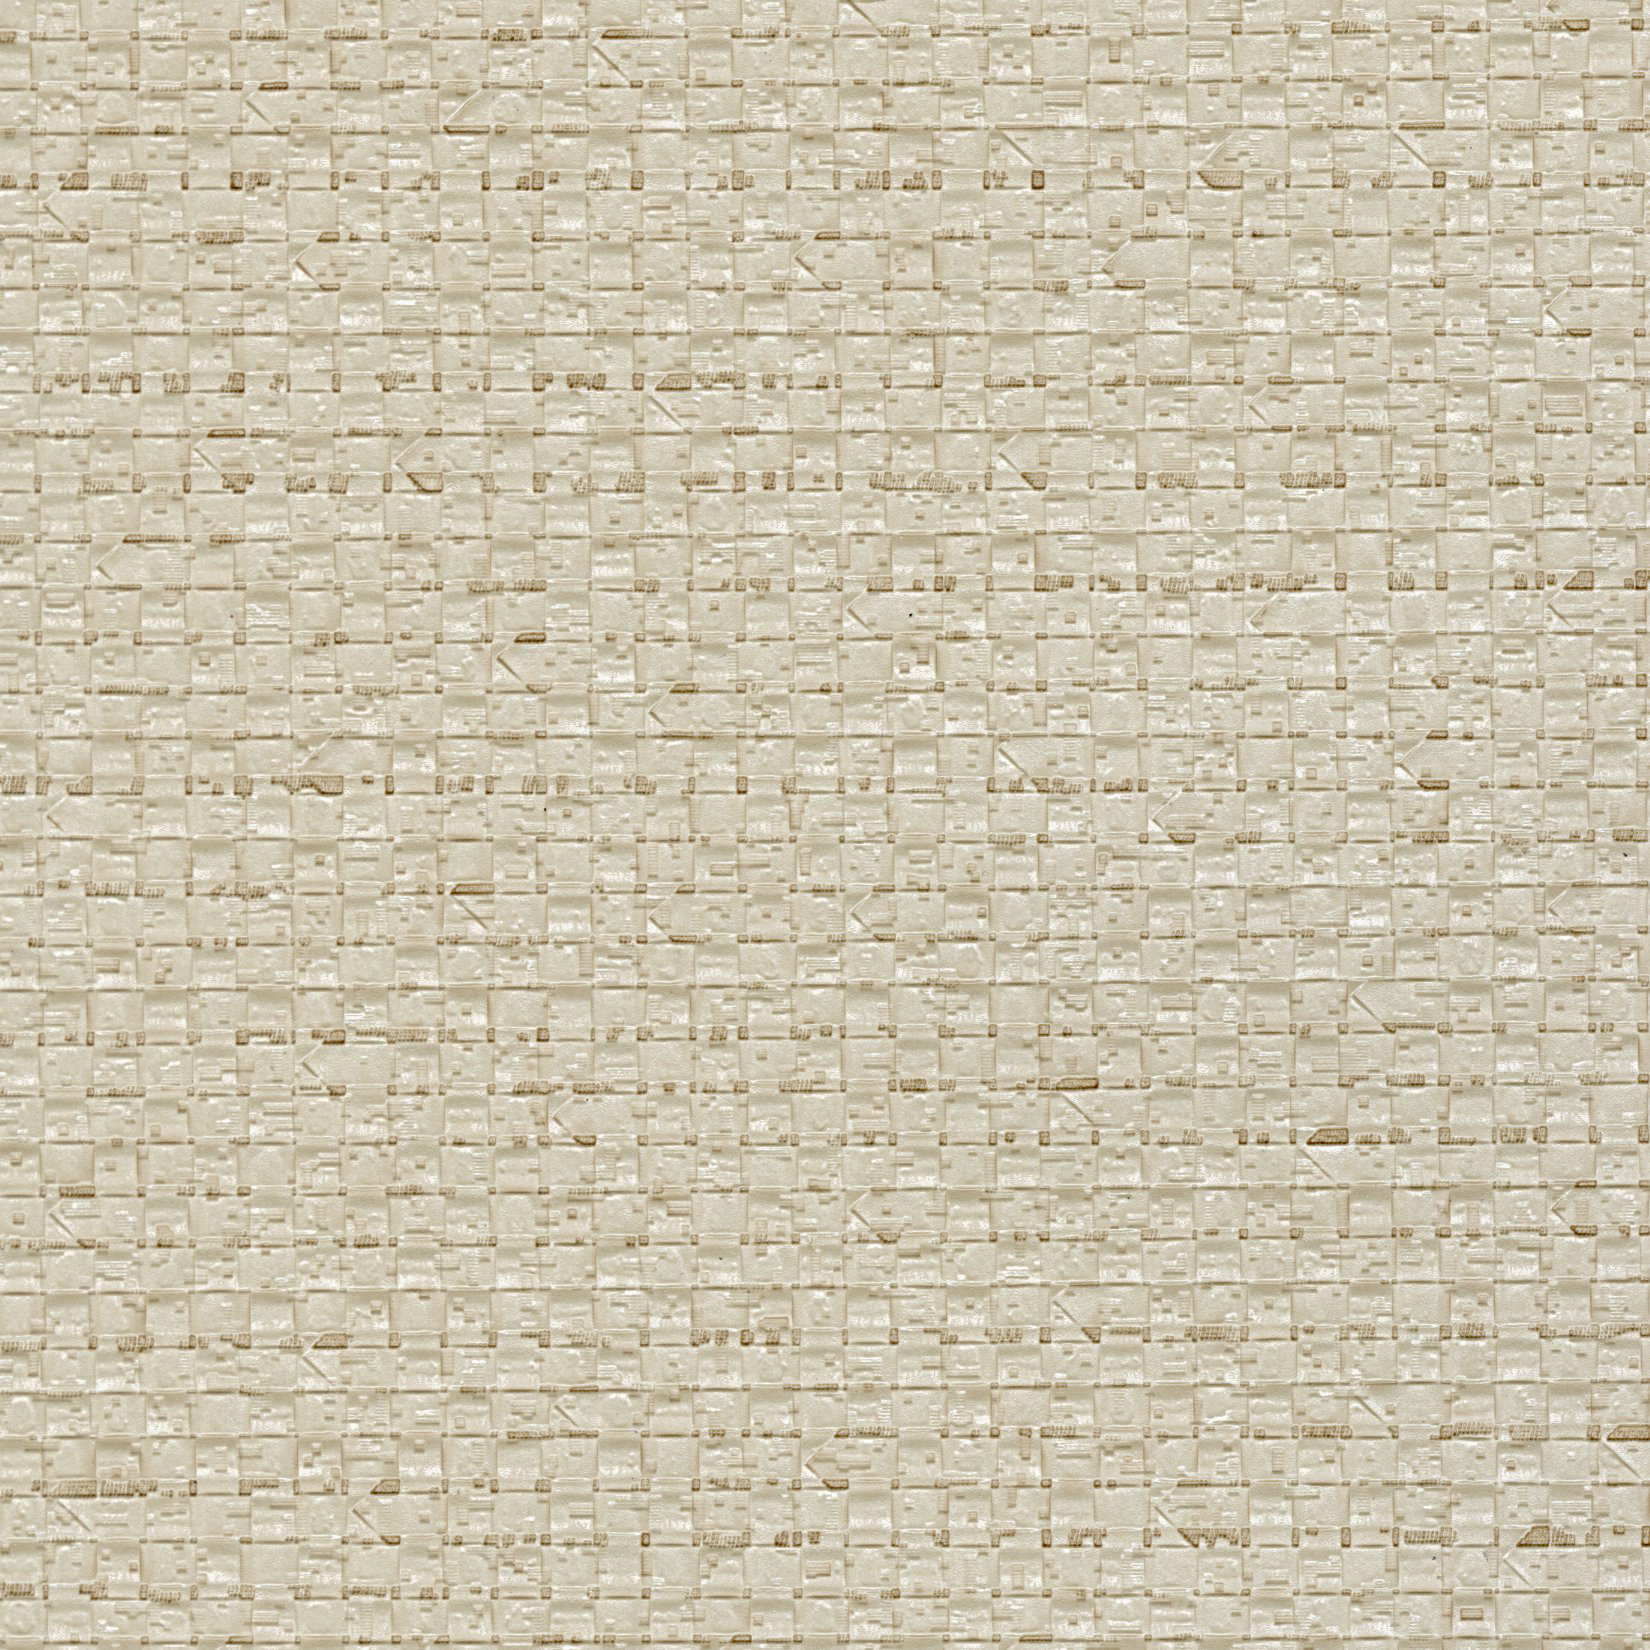 Fabric 1 19. Ткани Guilford of Maine. Multicolored Fabric & Rattan. Rattan texture. Fabric 1.20.2.